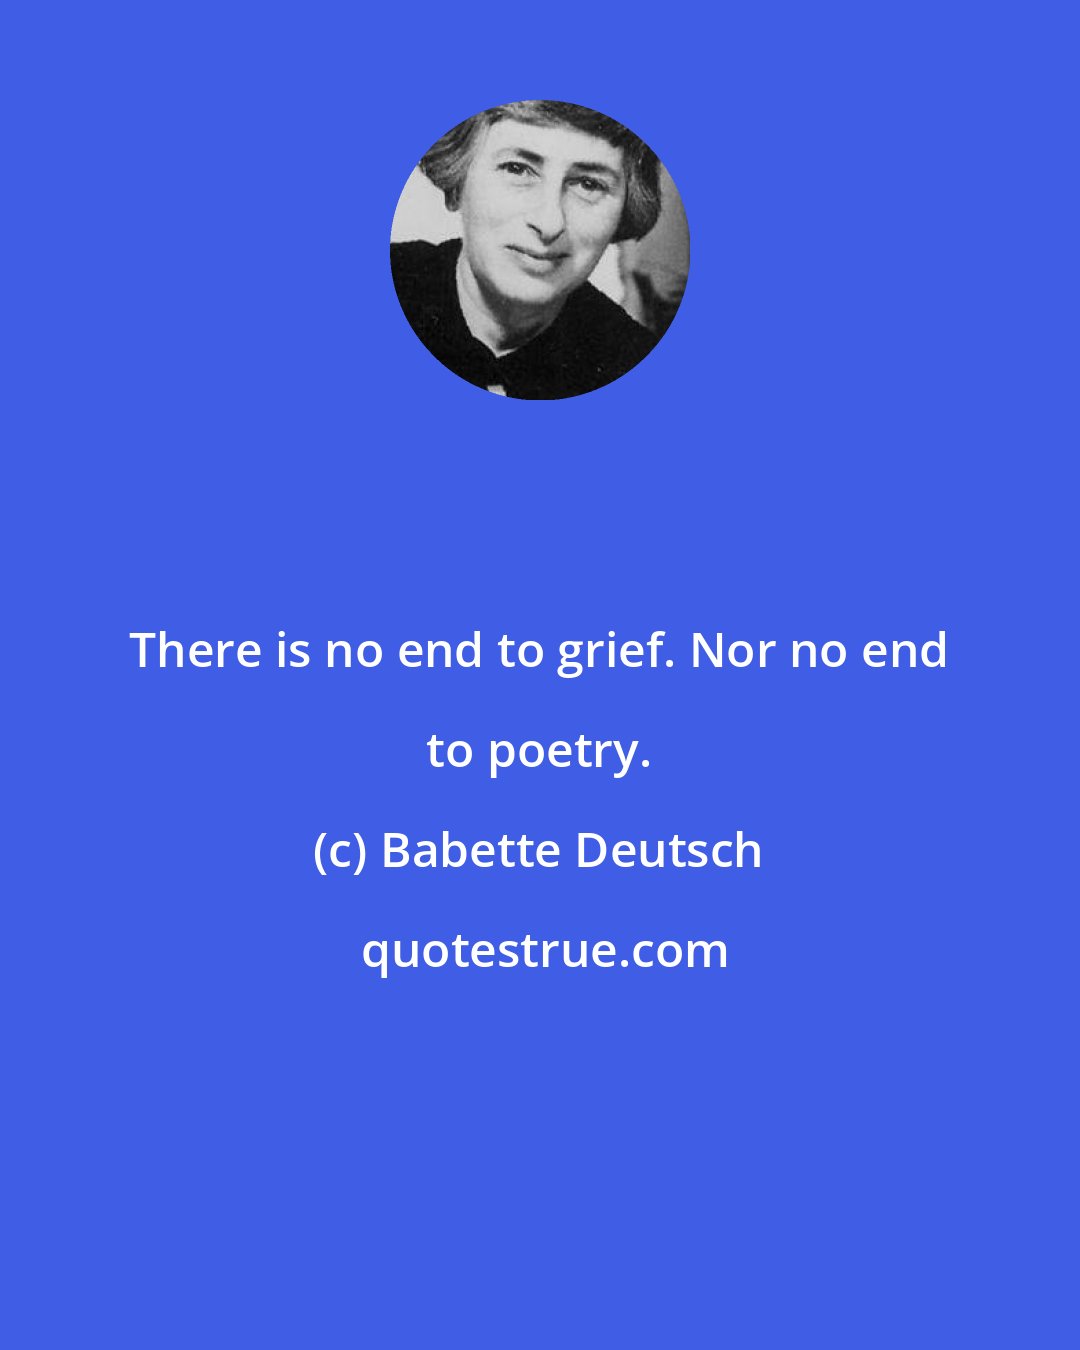 Babette Deutsch: There is no end to grief. Nor no end to poetry.